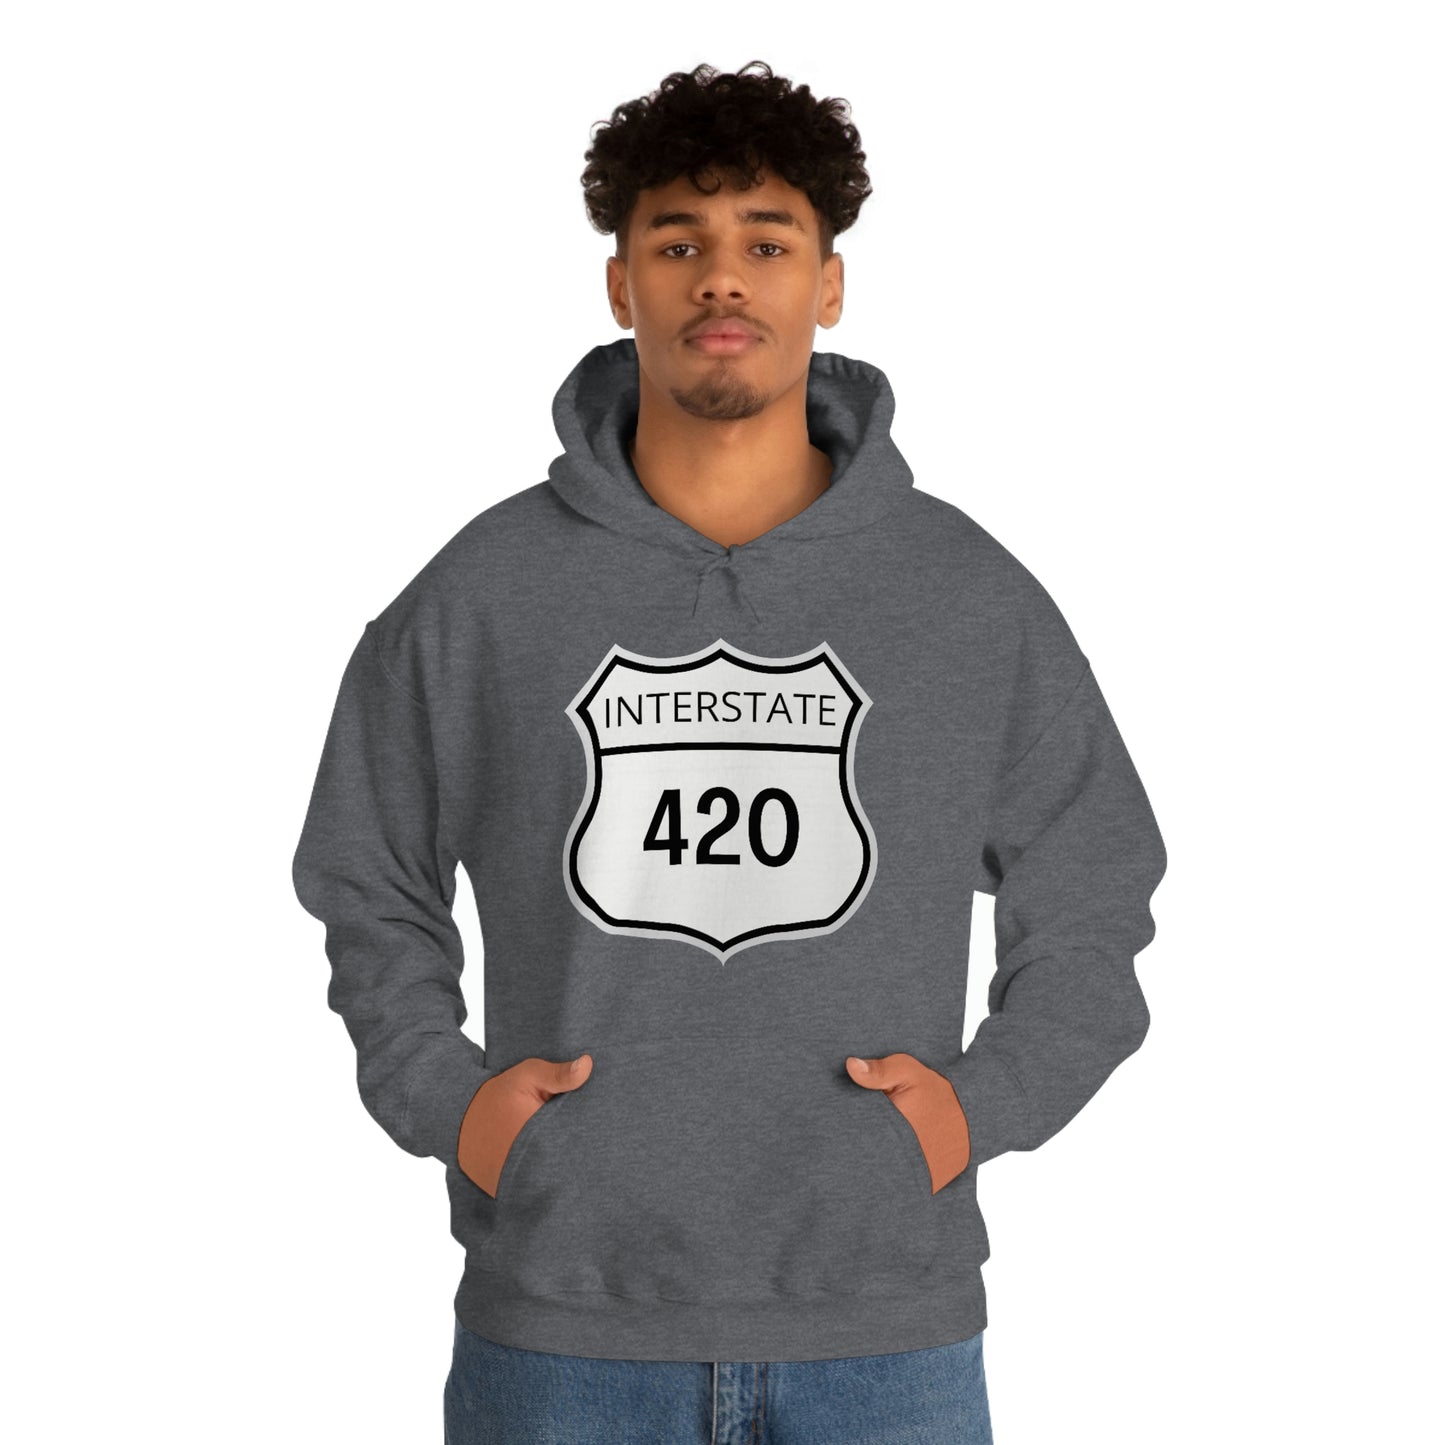 A young man wearing a charcoal gray Interstate 420 marijuana hoodie with his hands in his hoodie pocket